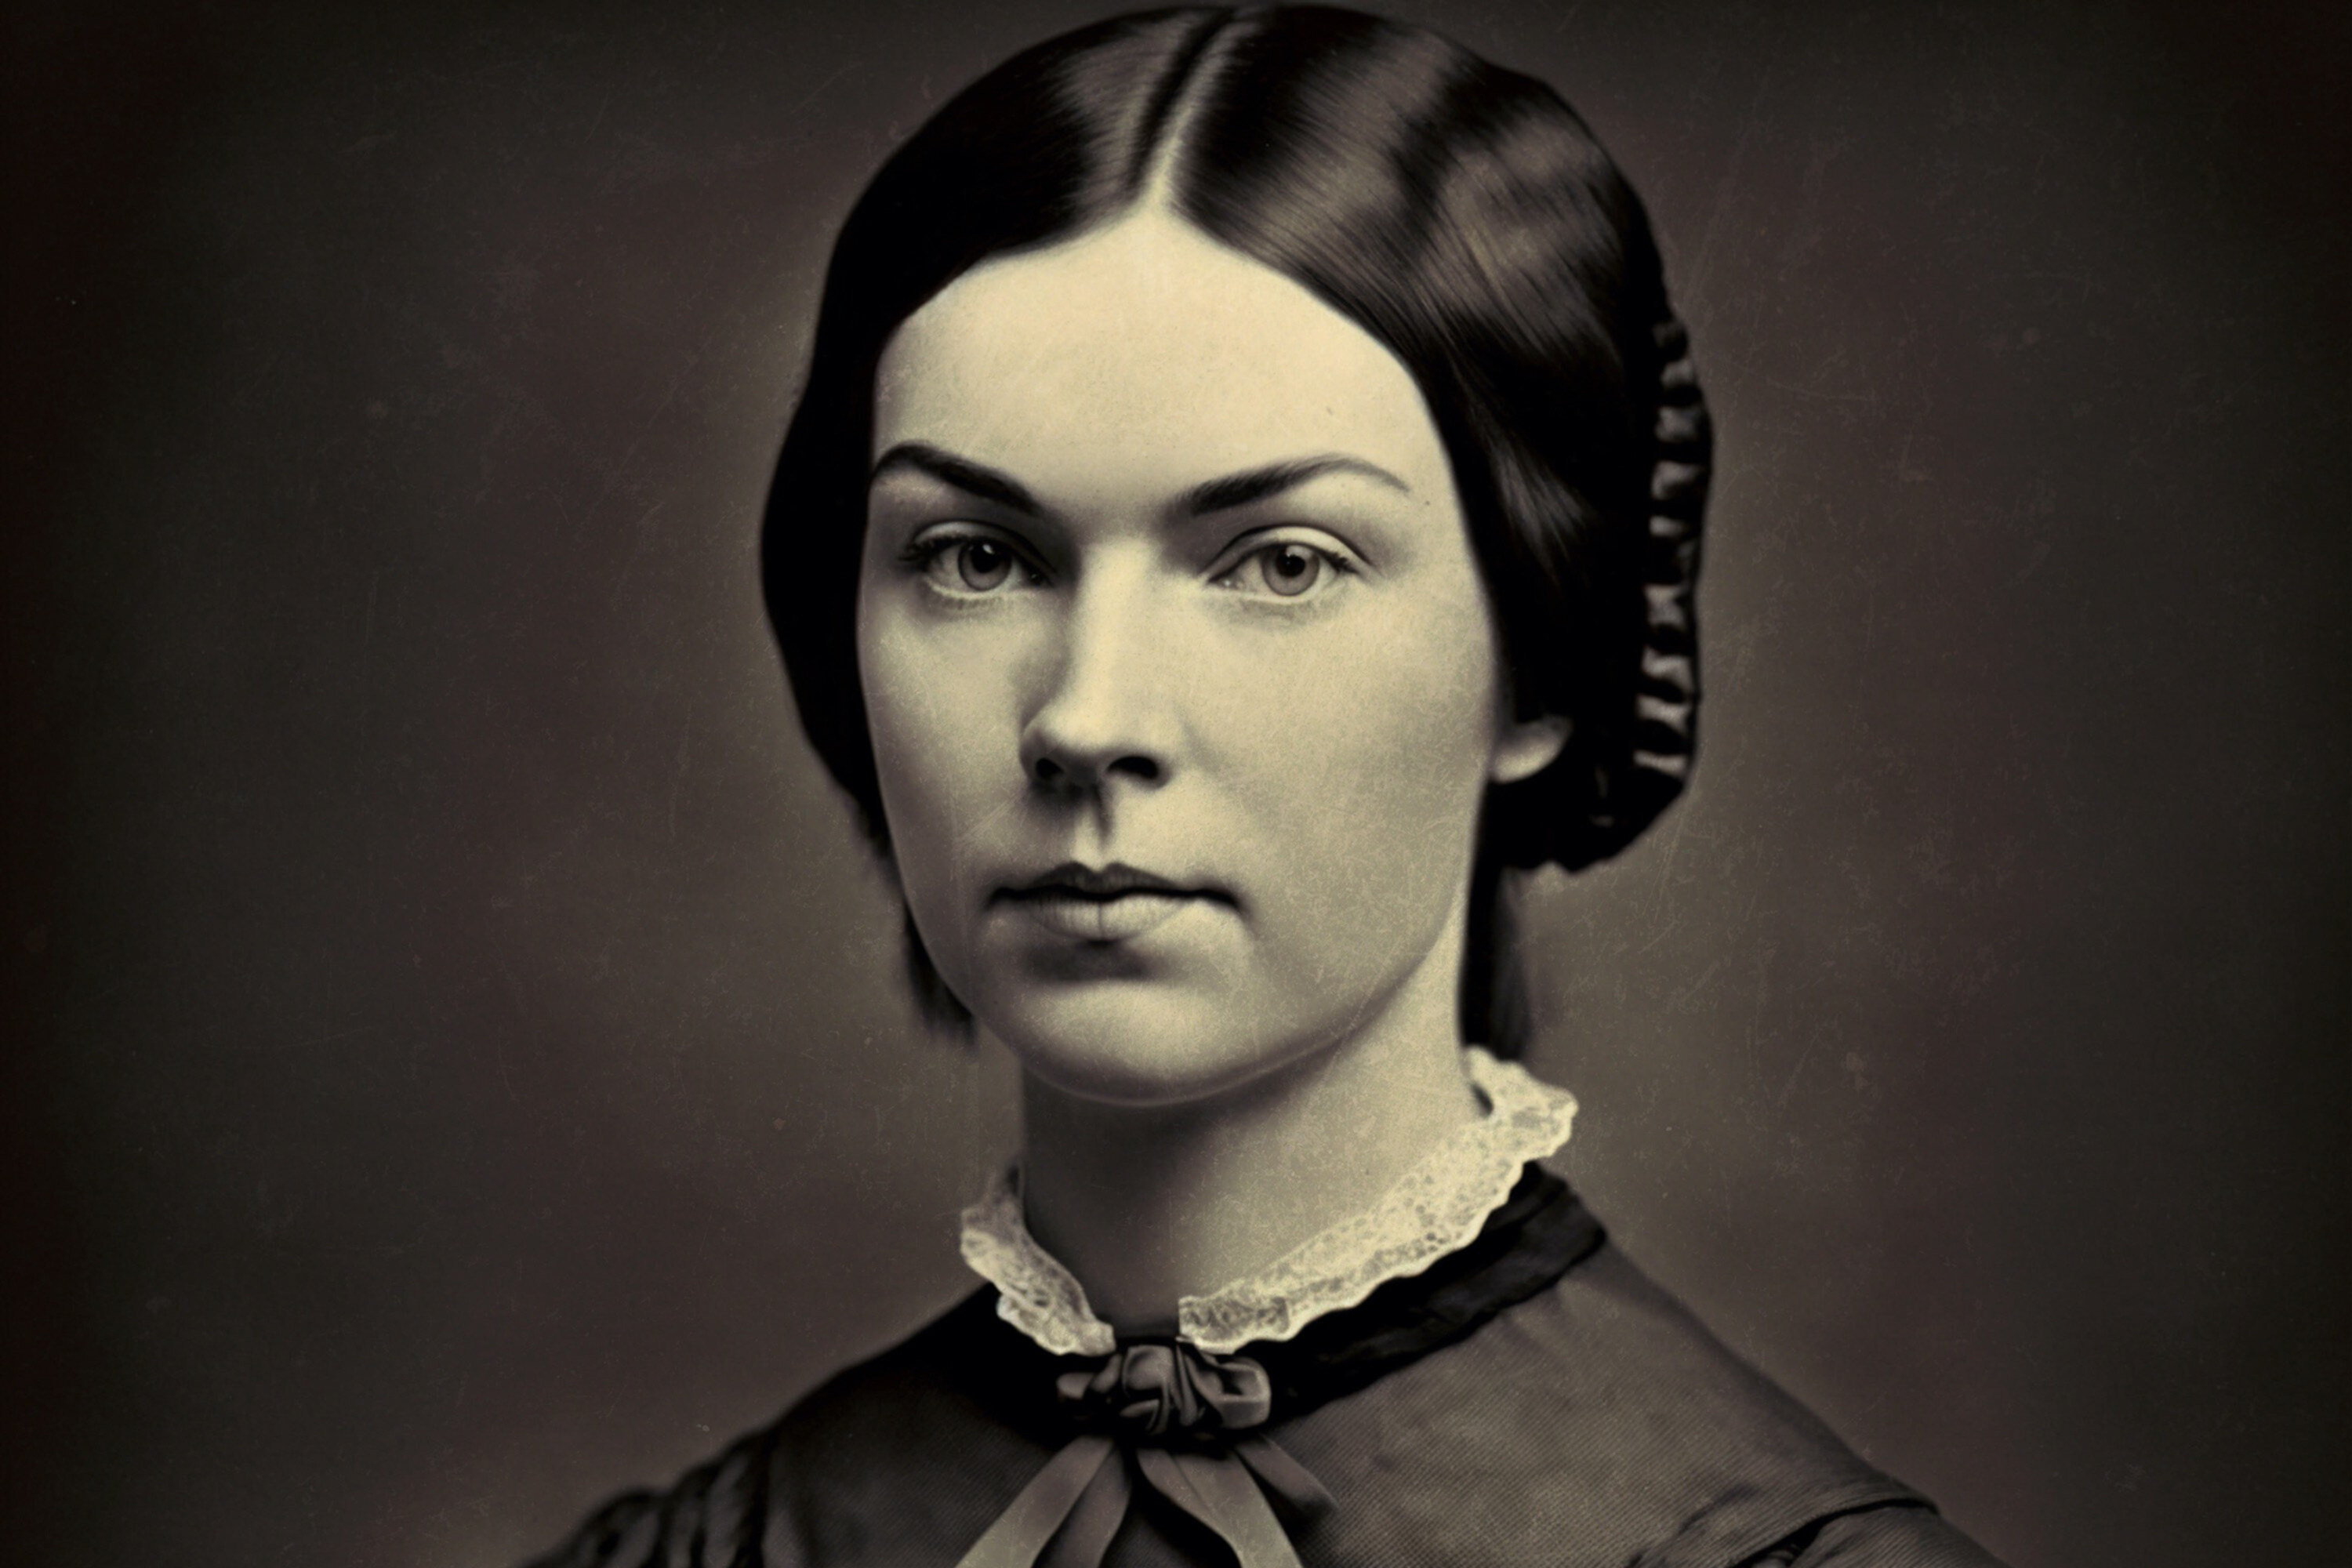 Famous People With Autism Spectrum Disorder - Emily Dickinson - American Poet